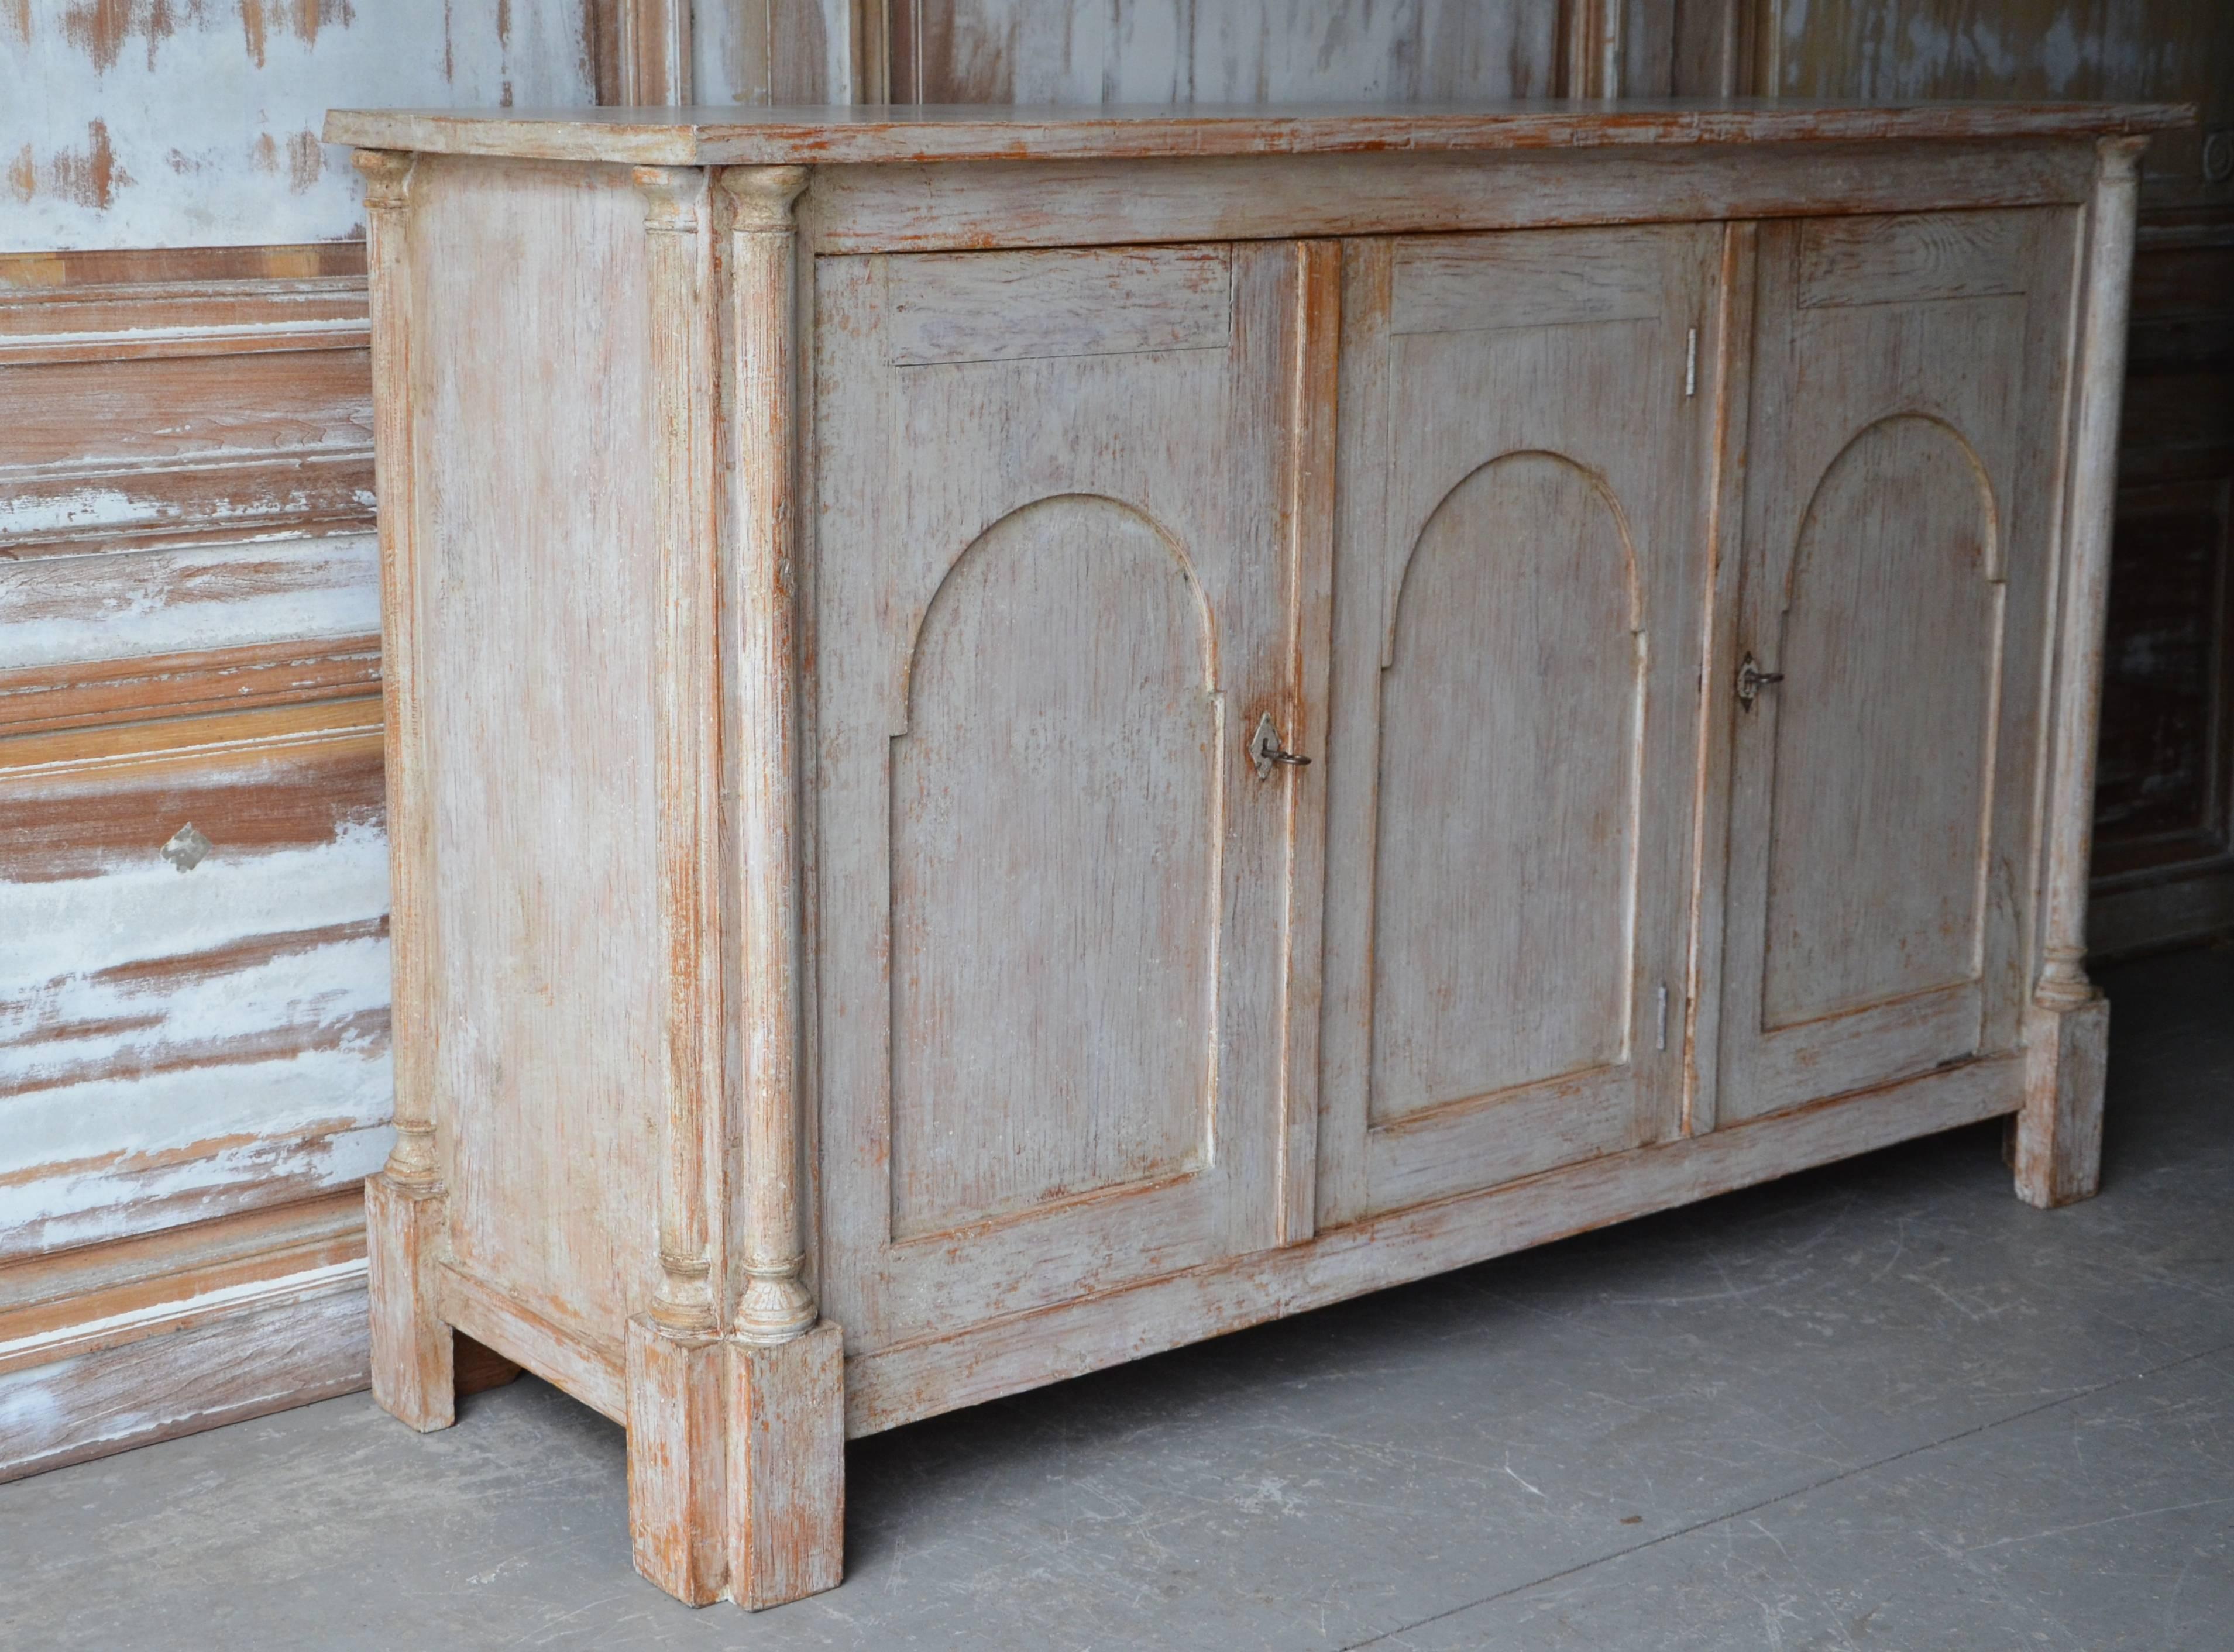 Large, very handsome early 19th century Swedish Gustavian sideboard with three carved arched doors and neo classical columns to each corner in worn light gray patina.
Hälsingland, Sweden, circa 1830.
    
  